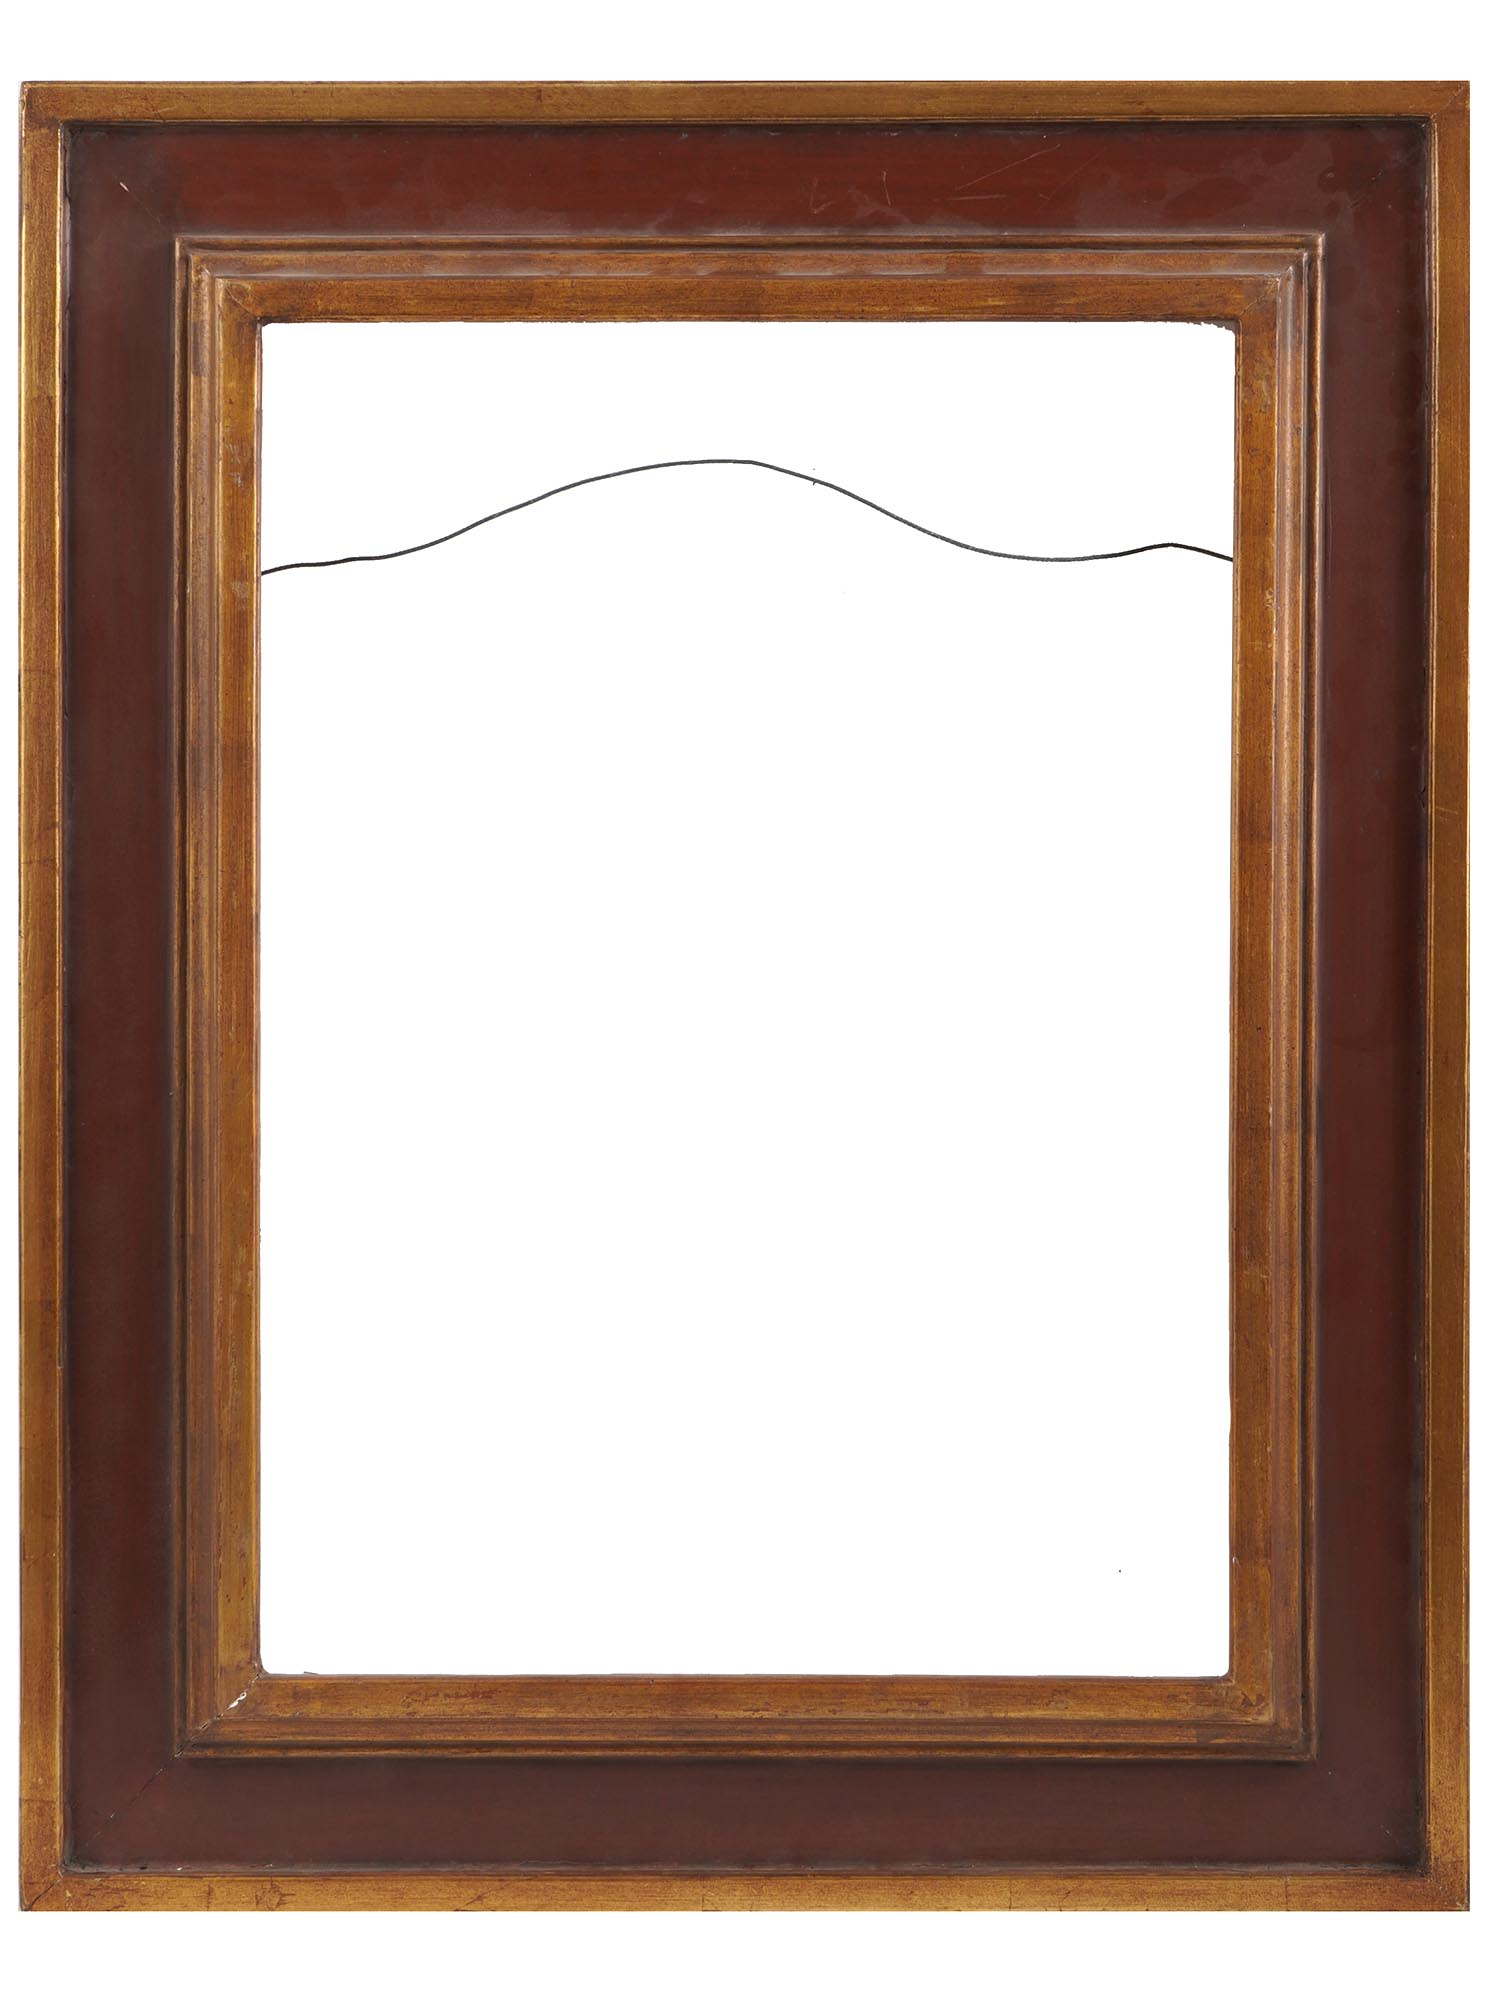 VINTAGE RECTANGULAR SHAPED WOODEN PICTURE FRAME PIC-0